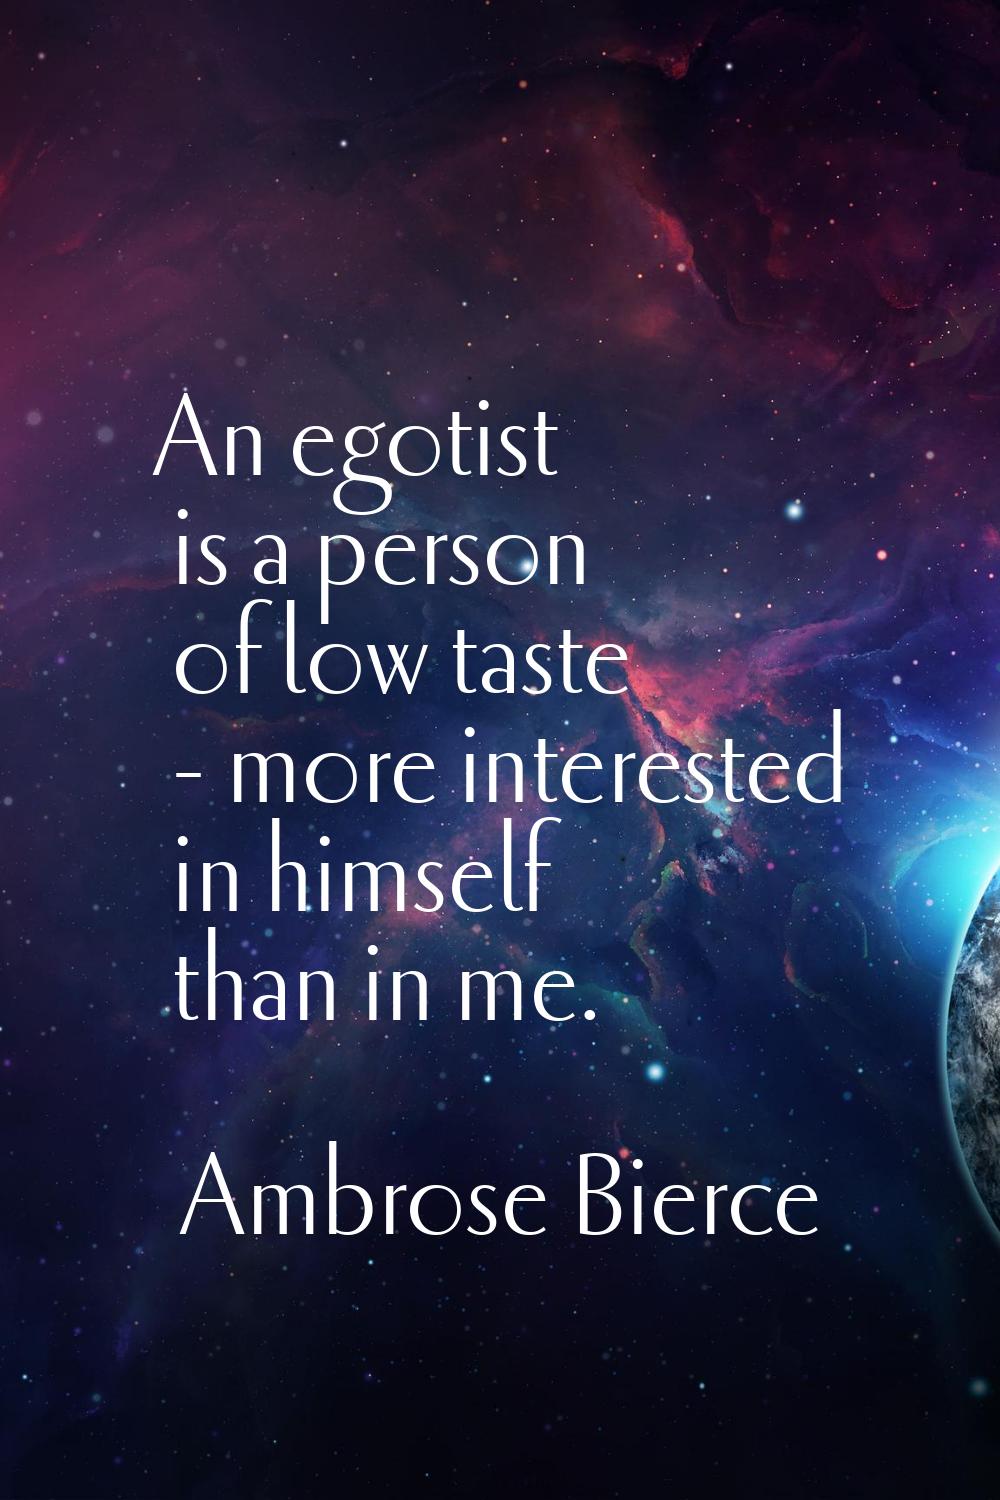 An egotist is a person of low taste - more interested in himself than in me.